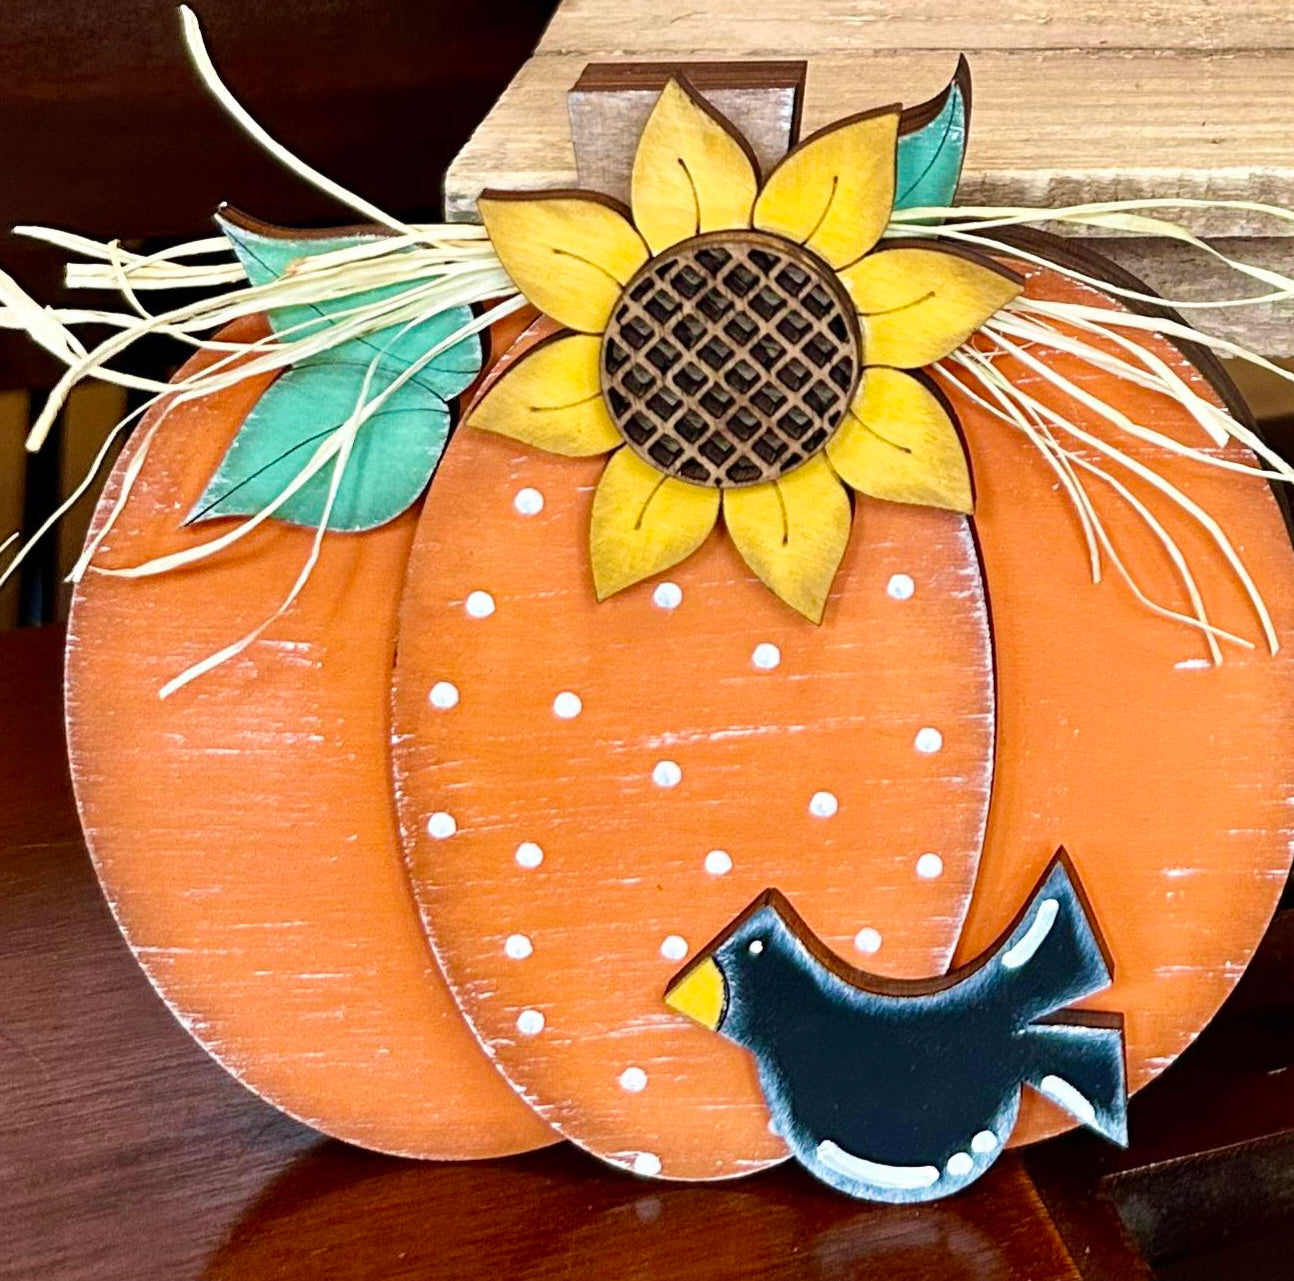 3D Freestanding Pumpkins with crow and sunflower